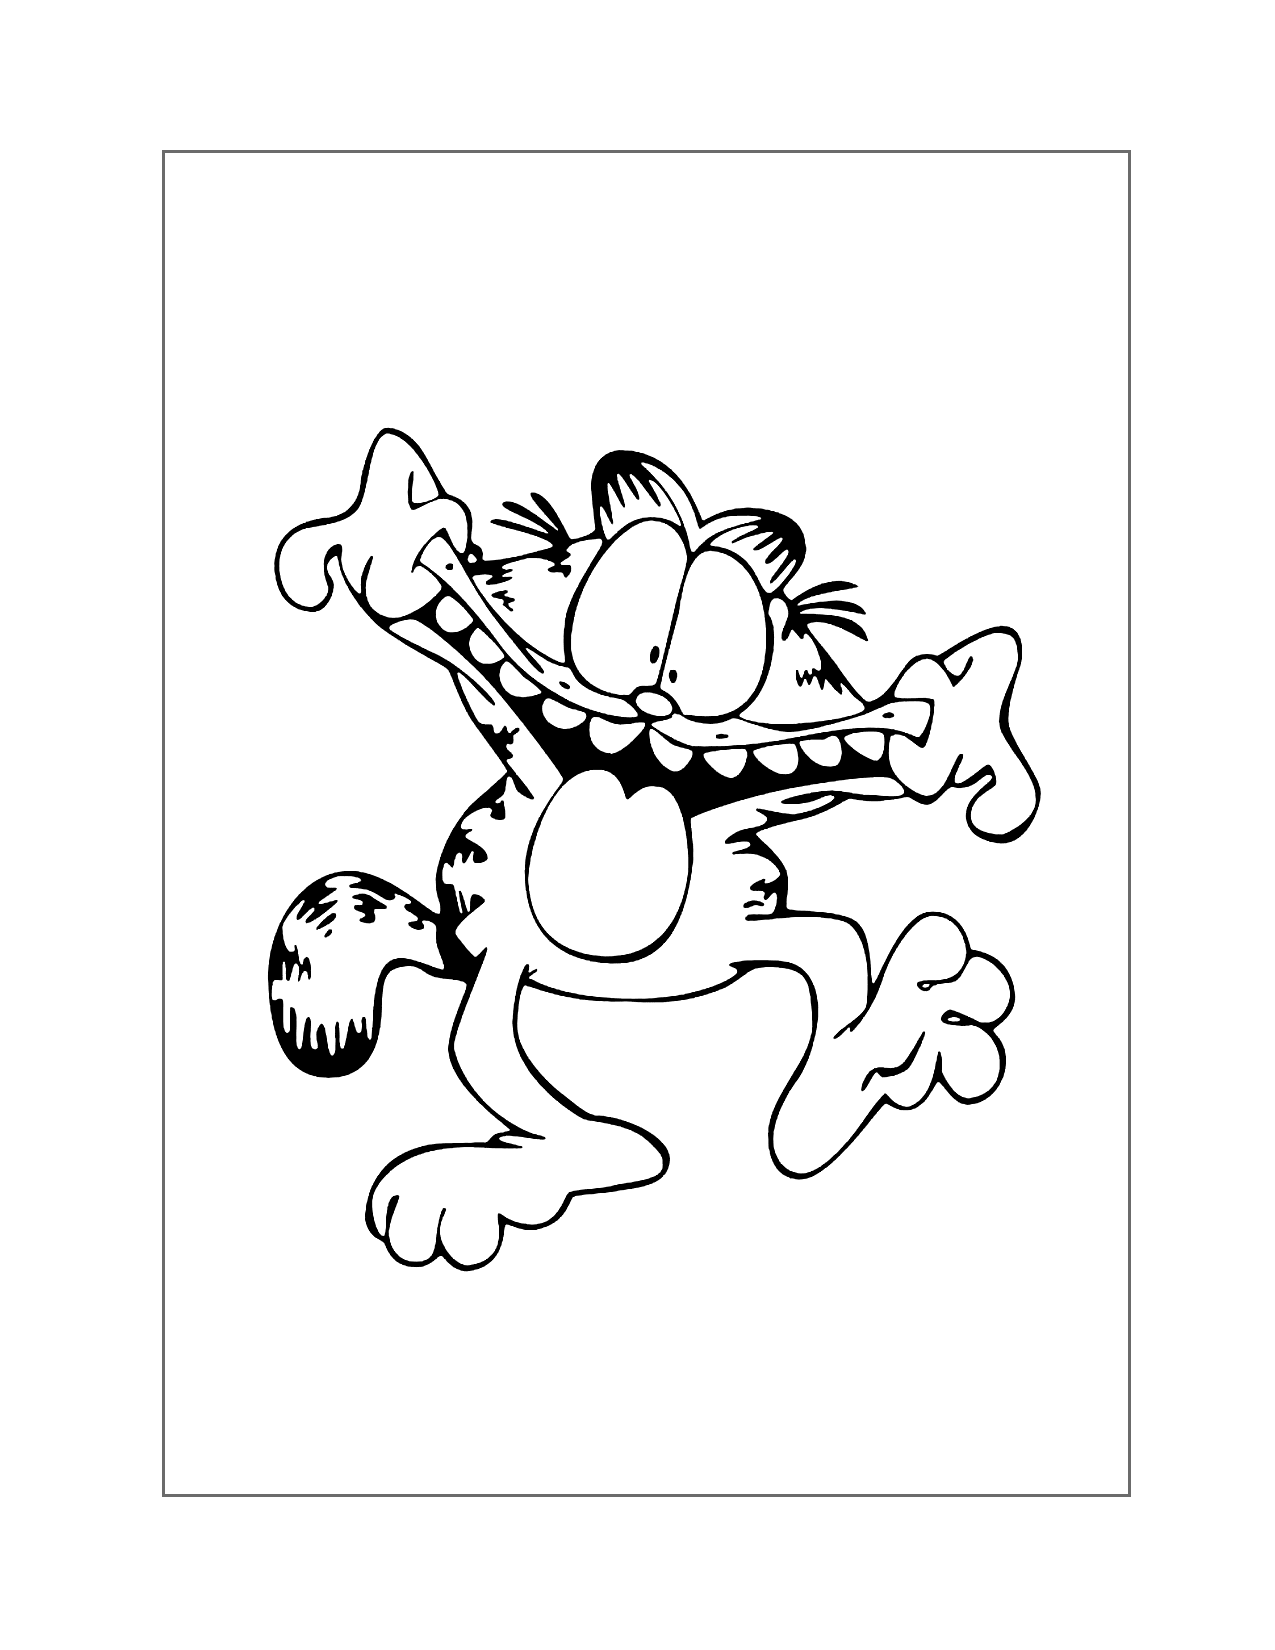 Garfield Making A Funny Face Coloring Page 1